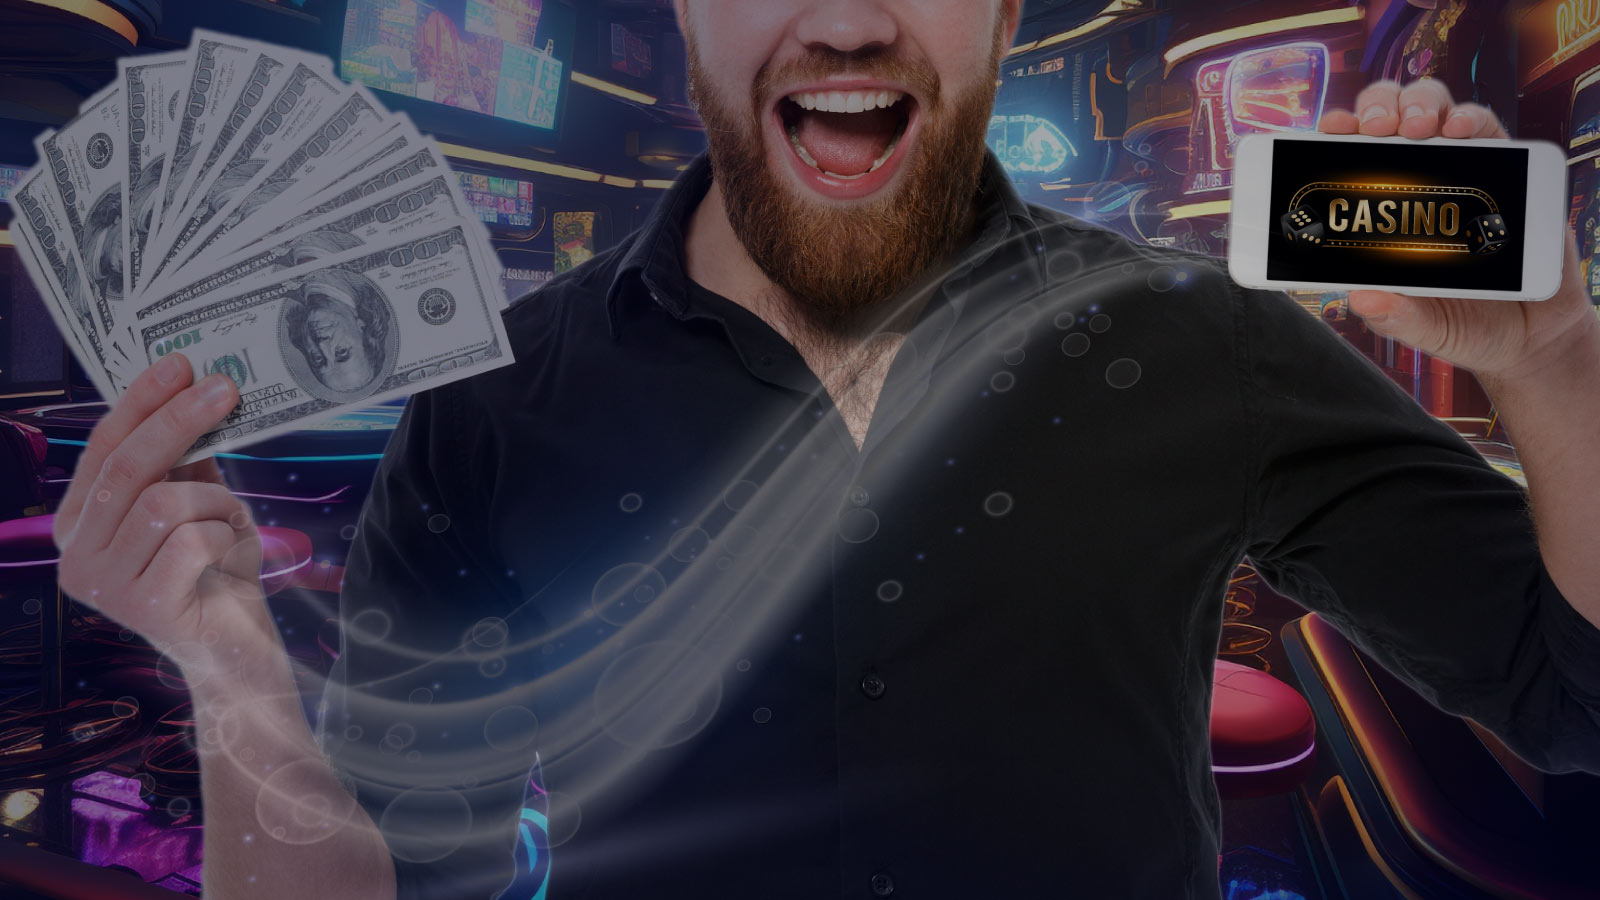 Can You Win Real Money at Online Casinos